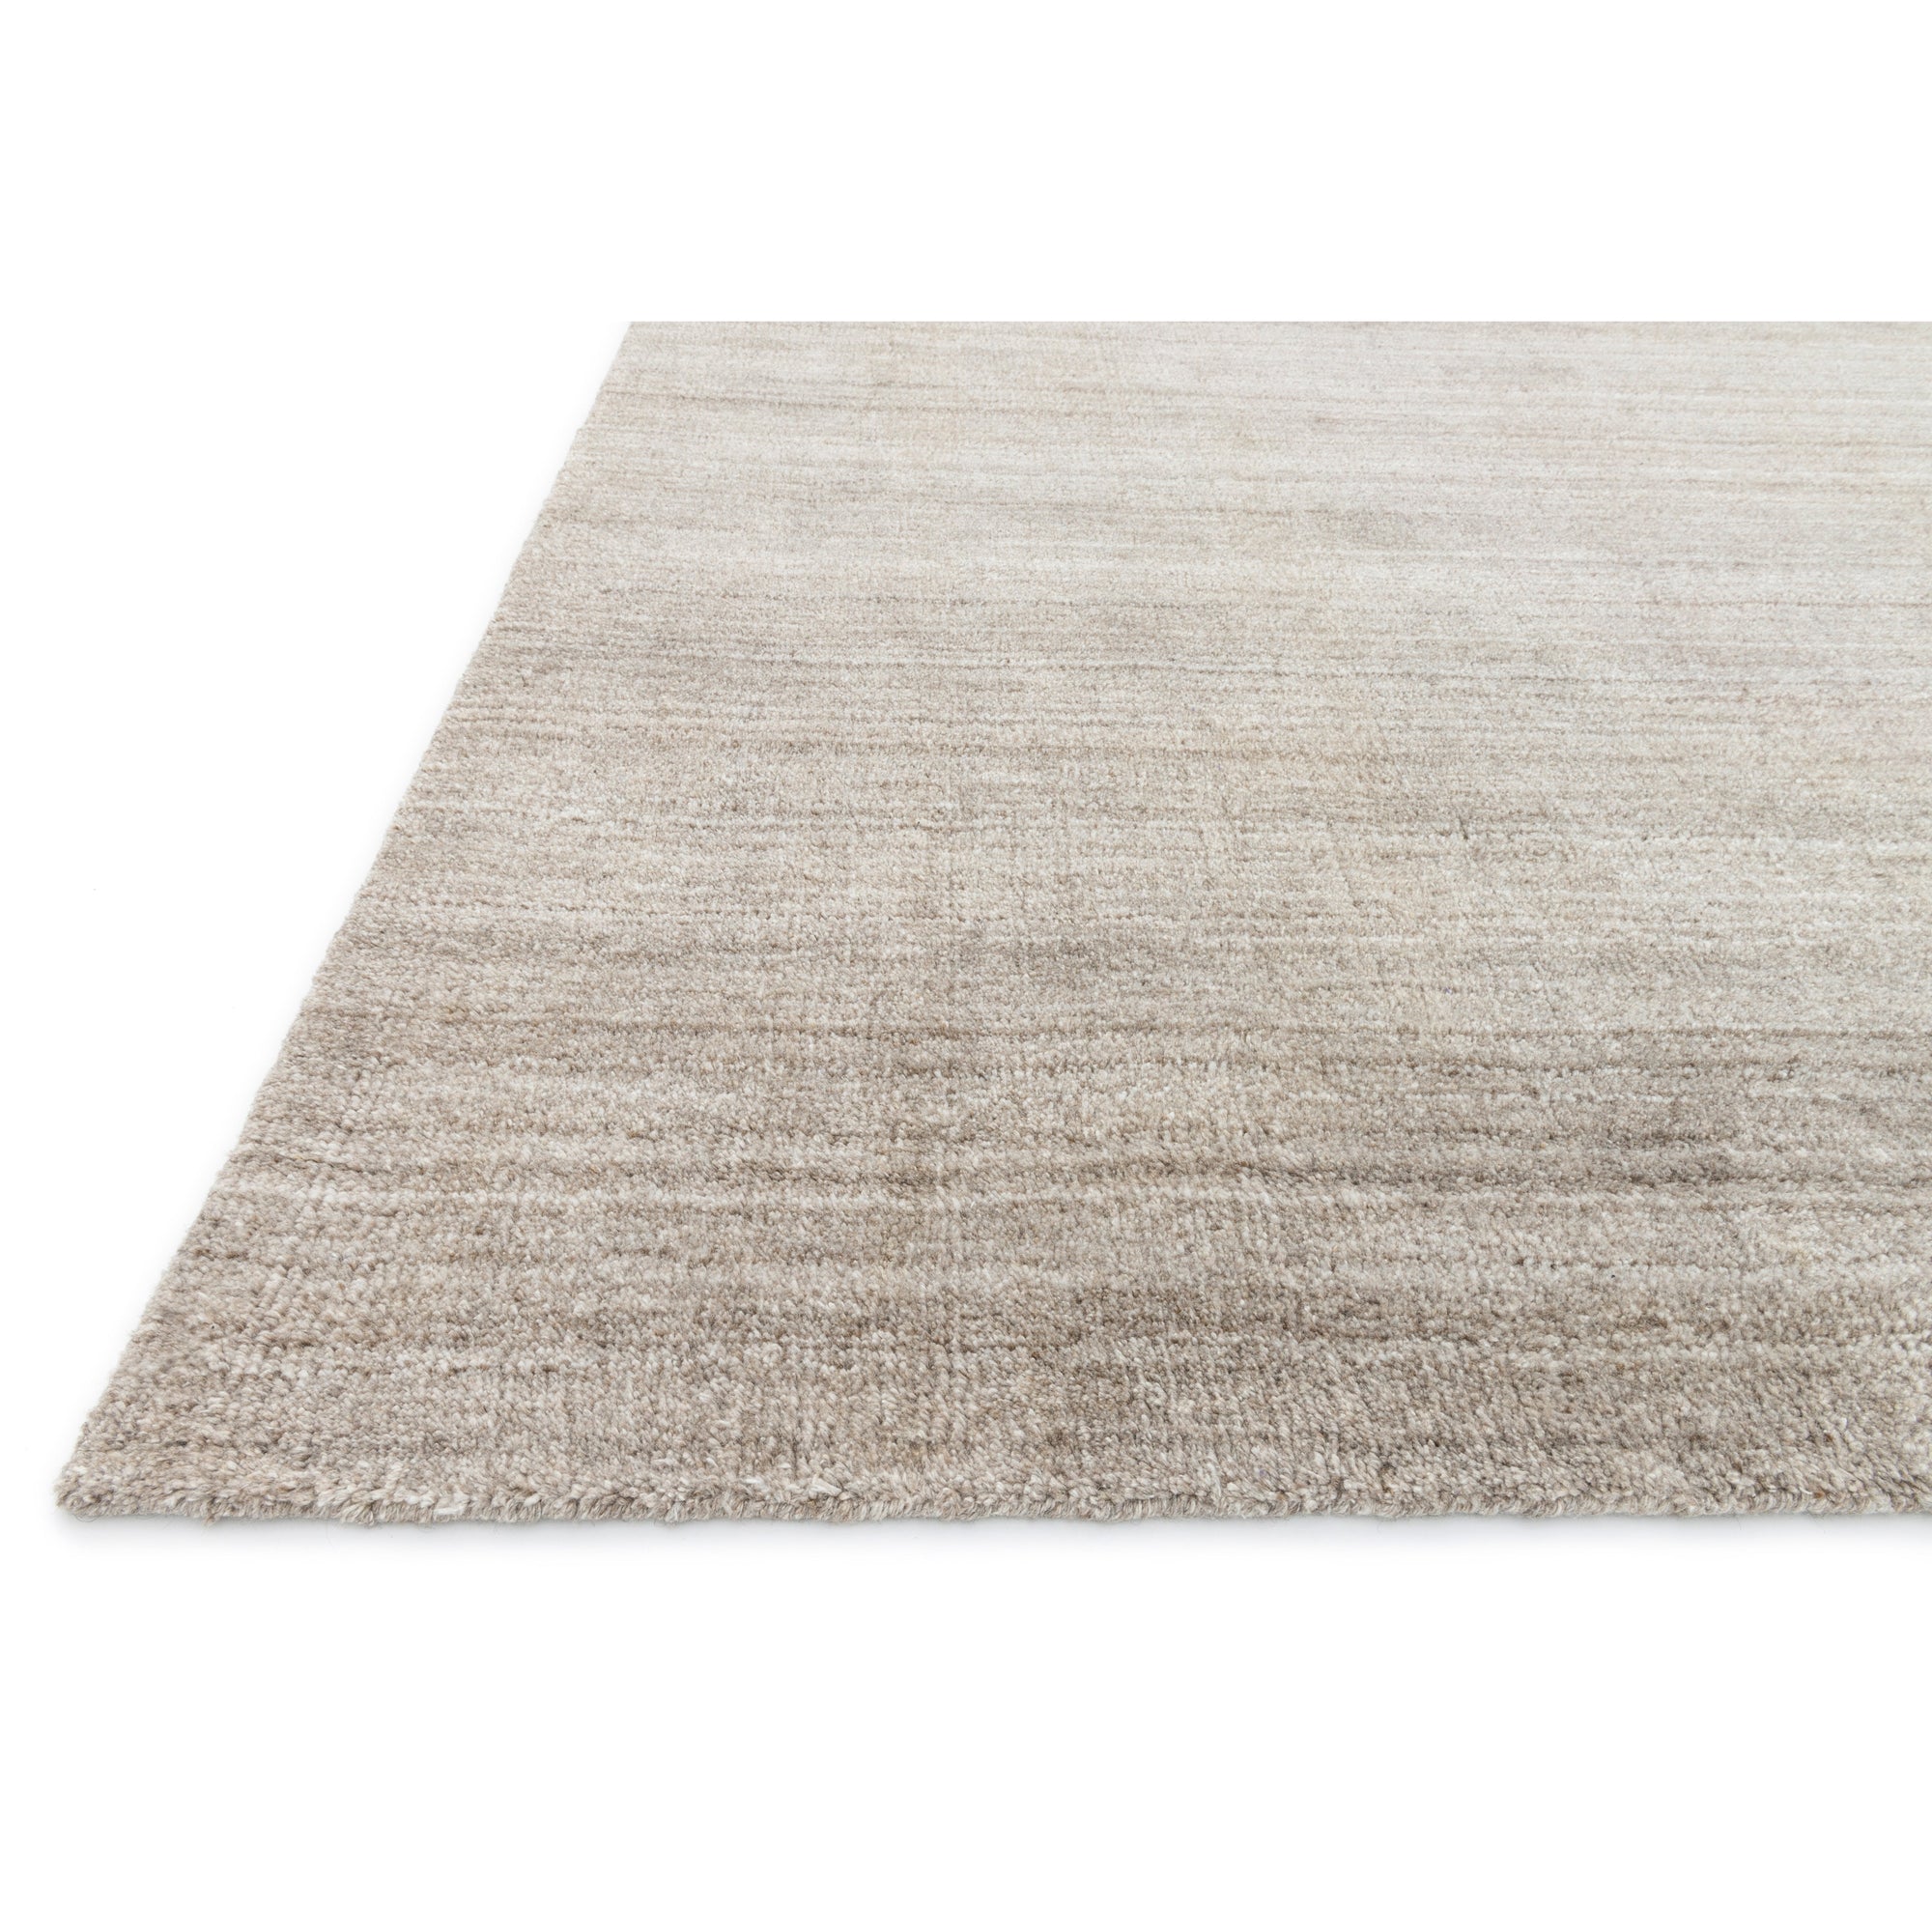 Rugs by Roo Loloi Barkley Mocha Area Rug in size 3' 6" x 5' 6"